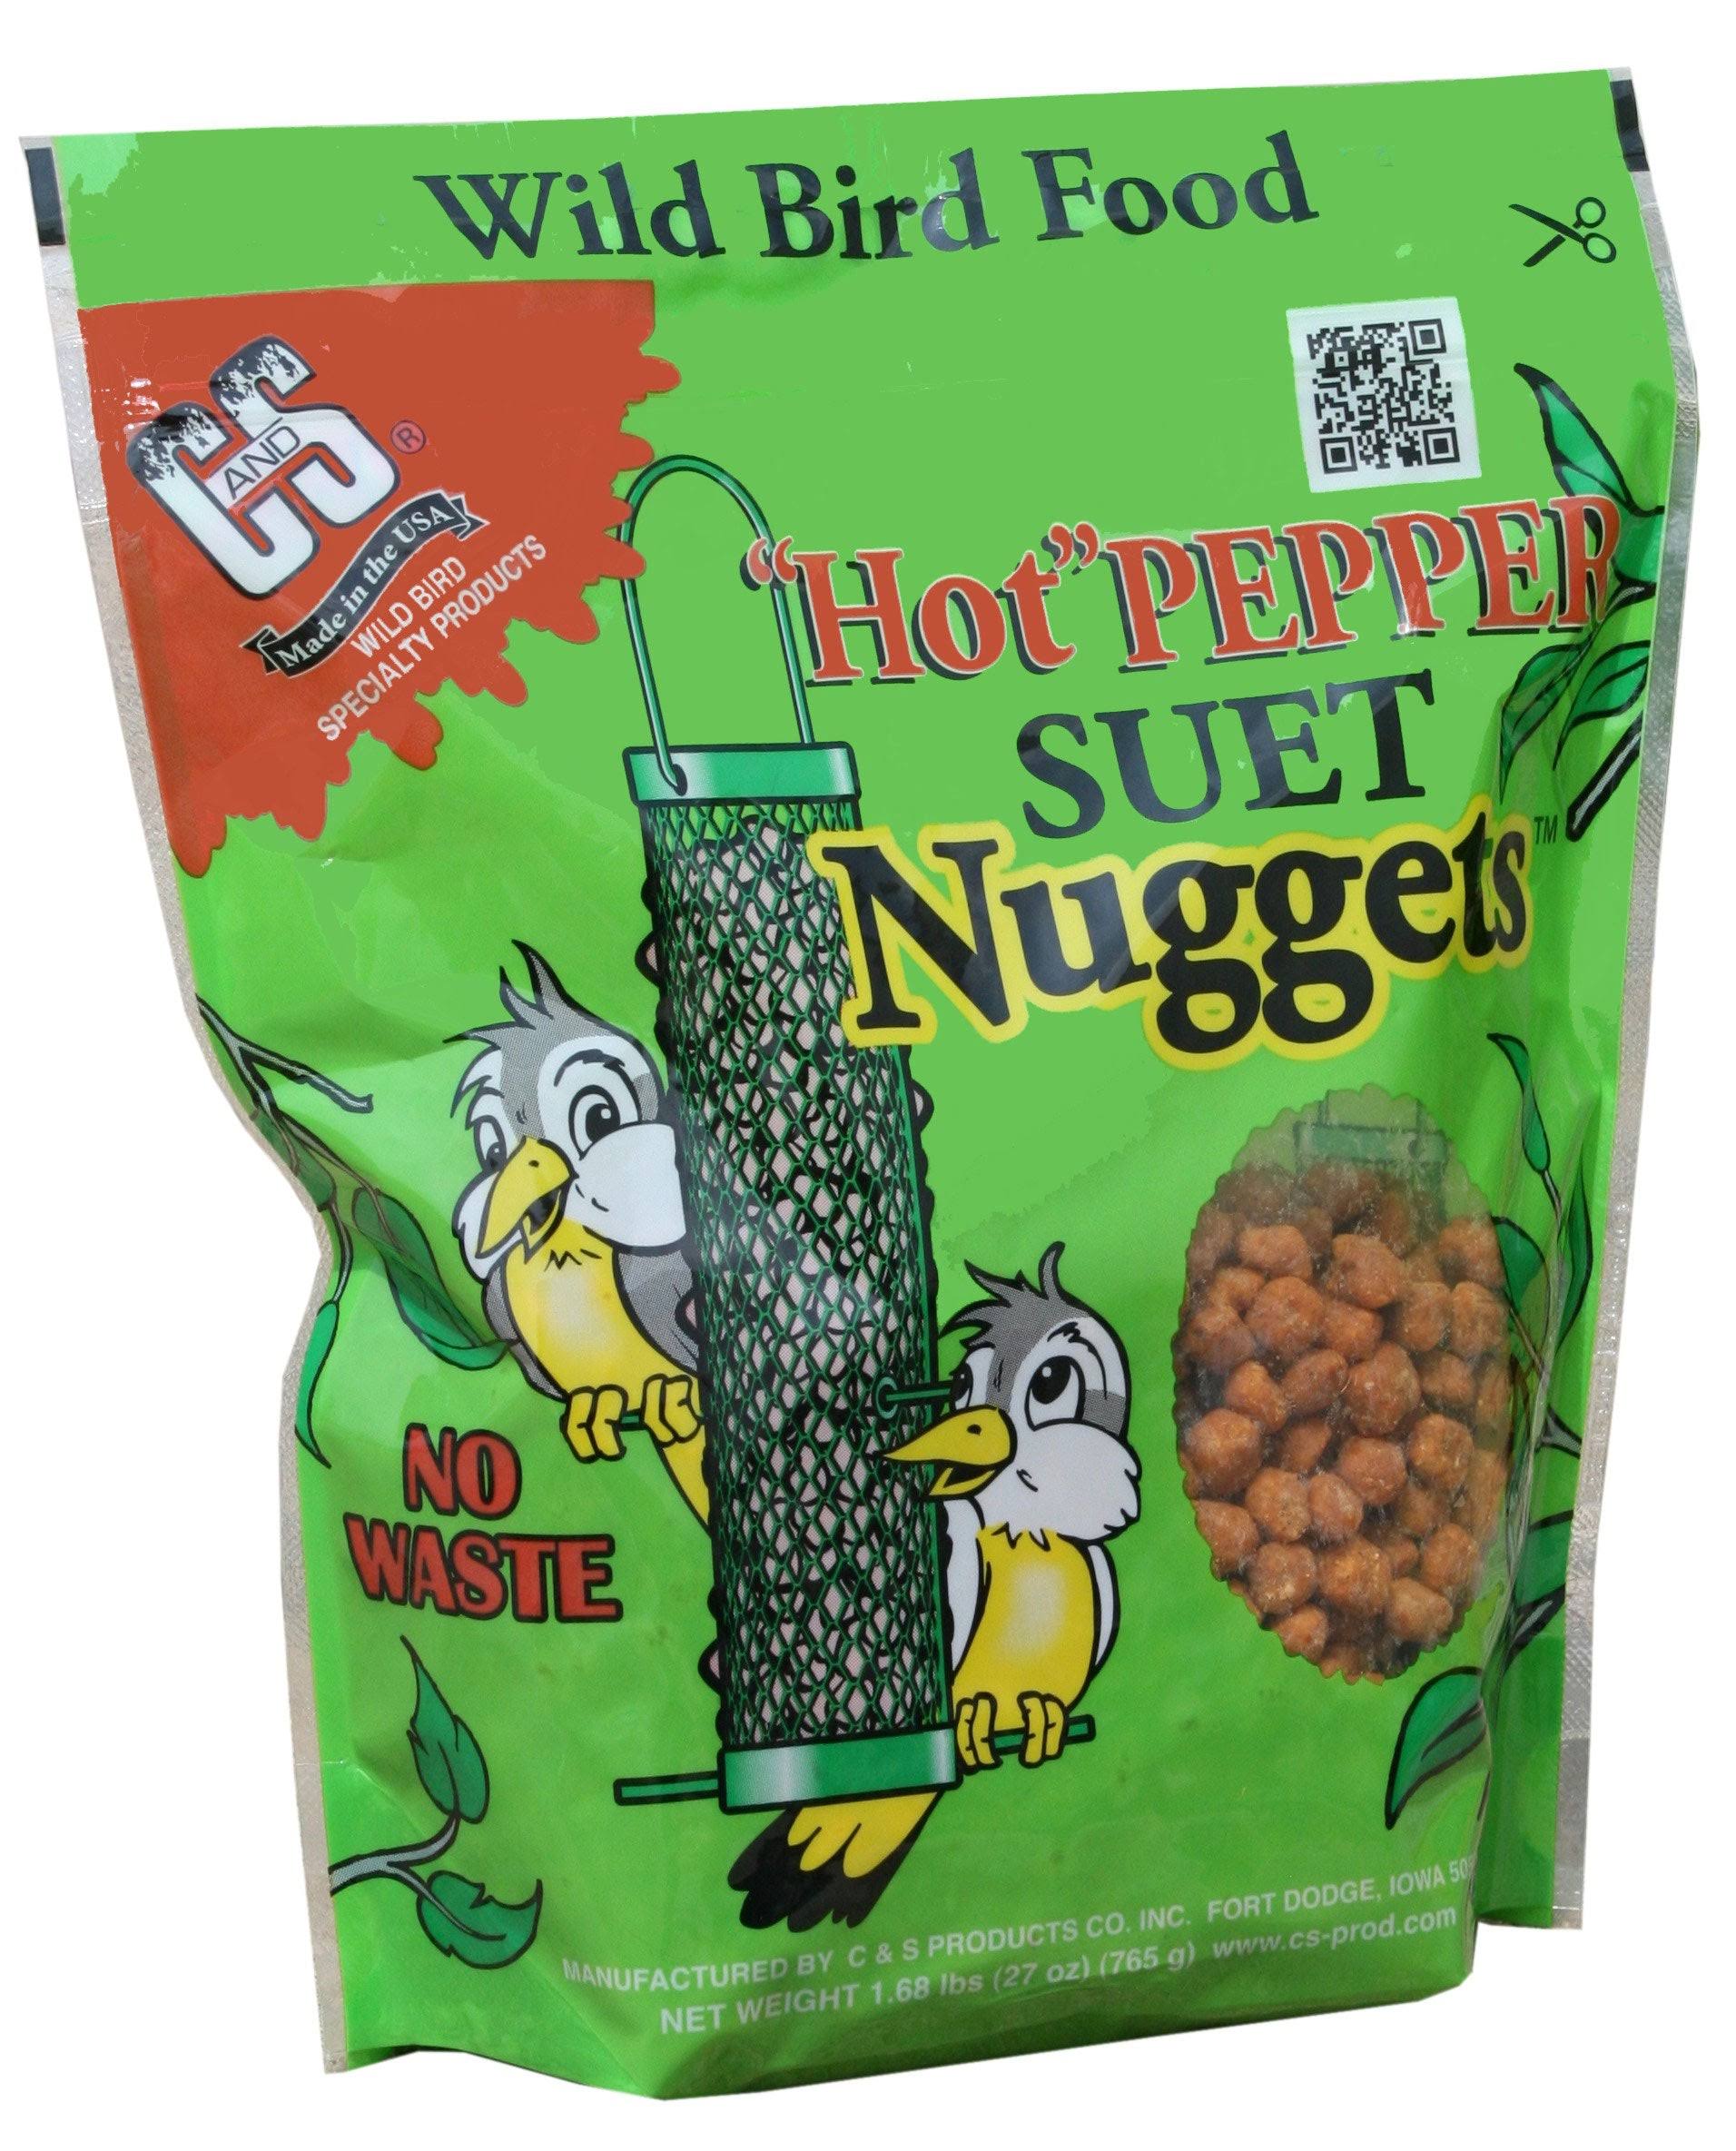 C &S Products Suet Nuggets Bird Food - Hot Pepper, 27oz